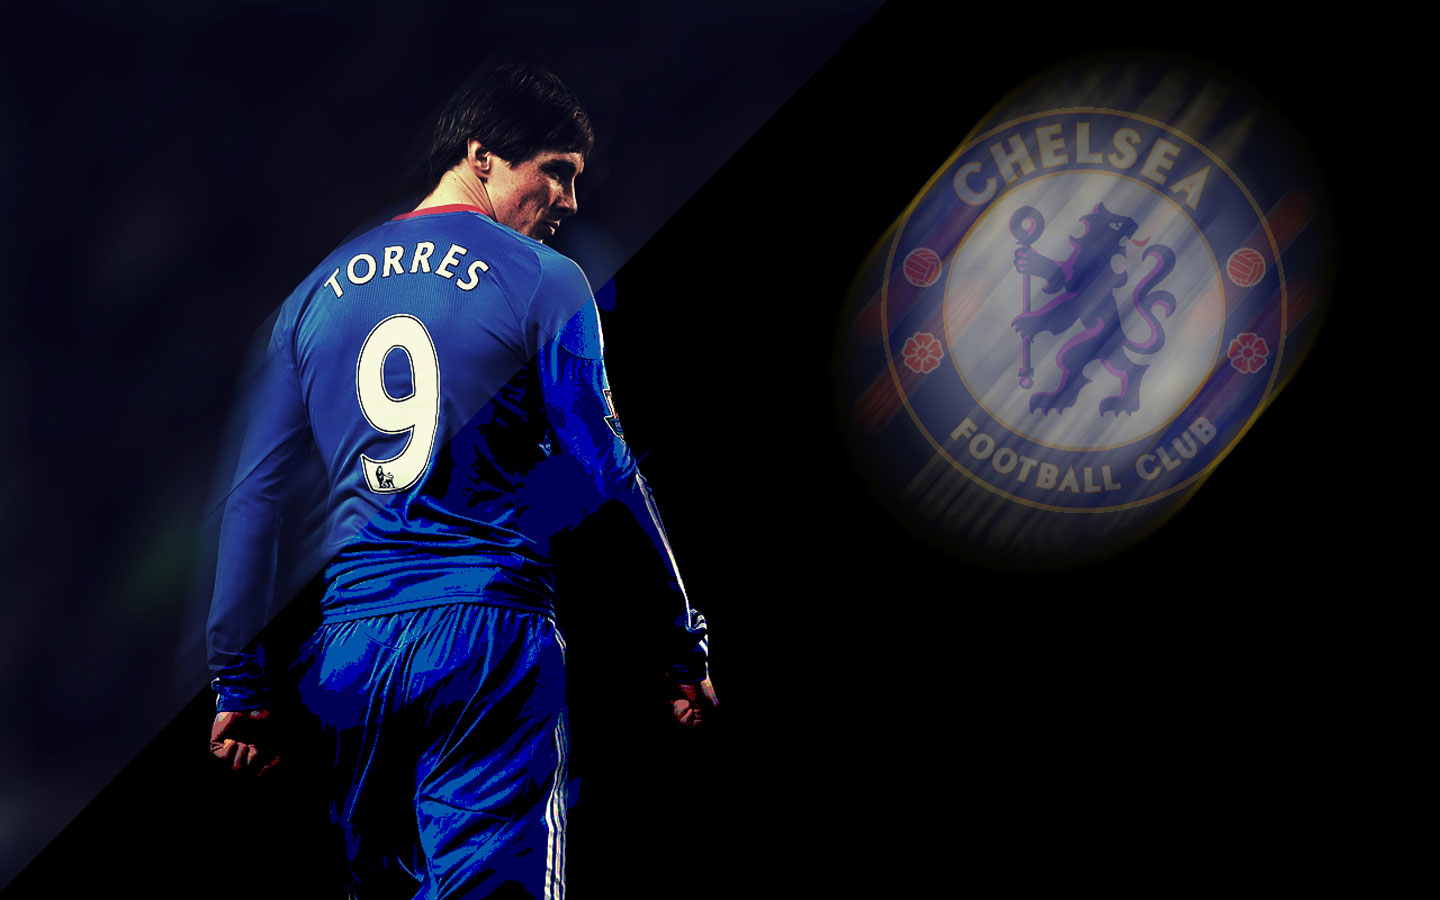 Fernando Torres HD Image Wallpaper Background Of Your Choice